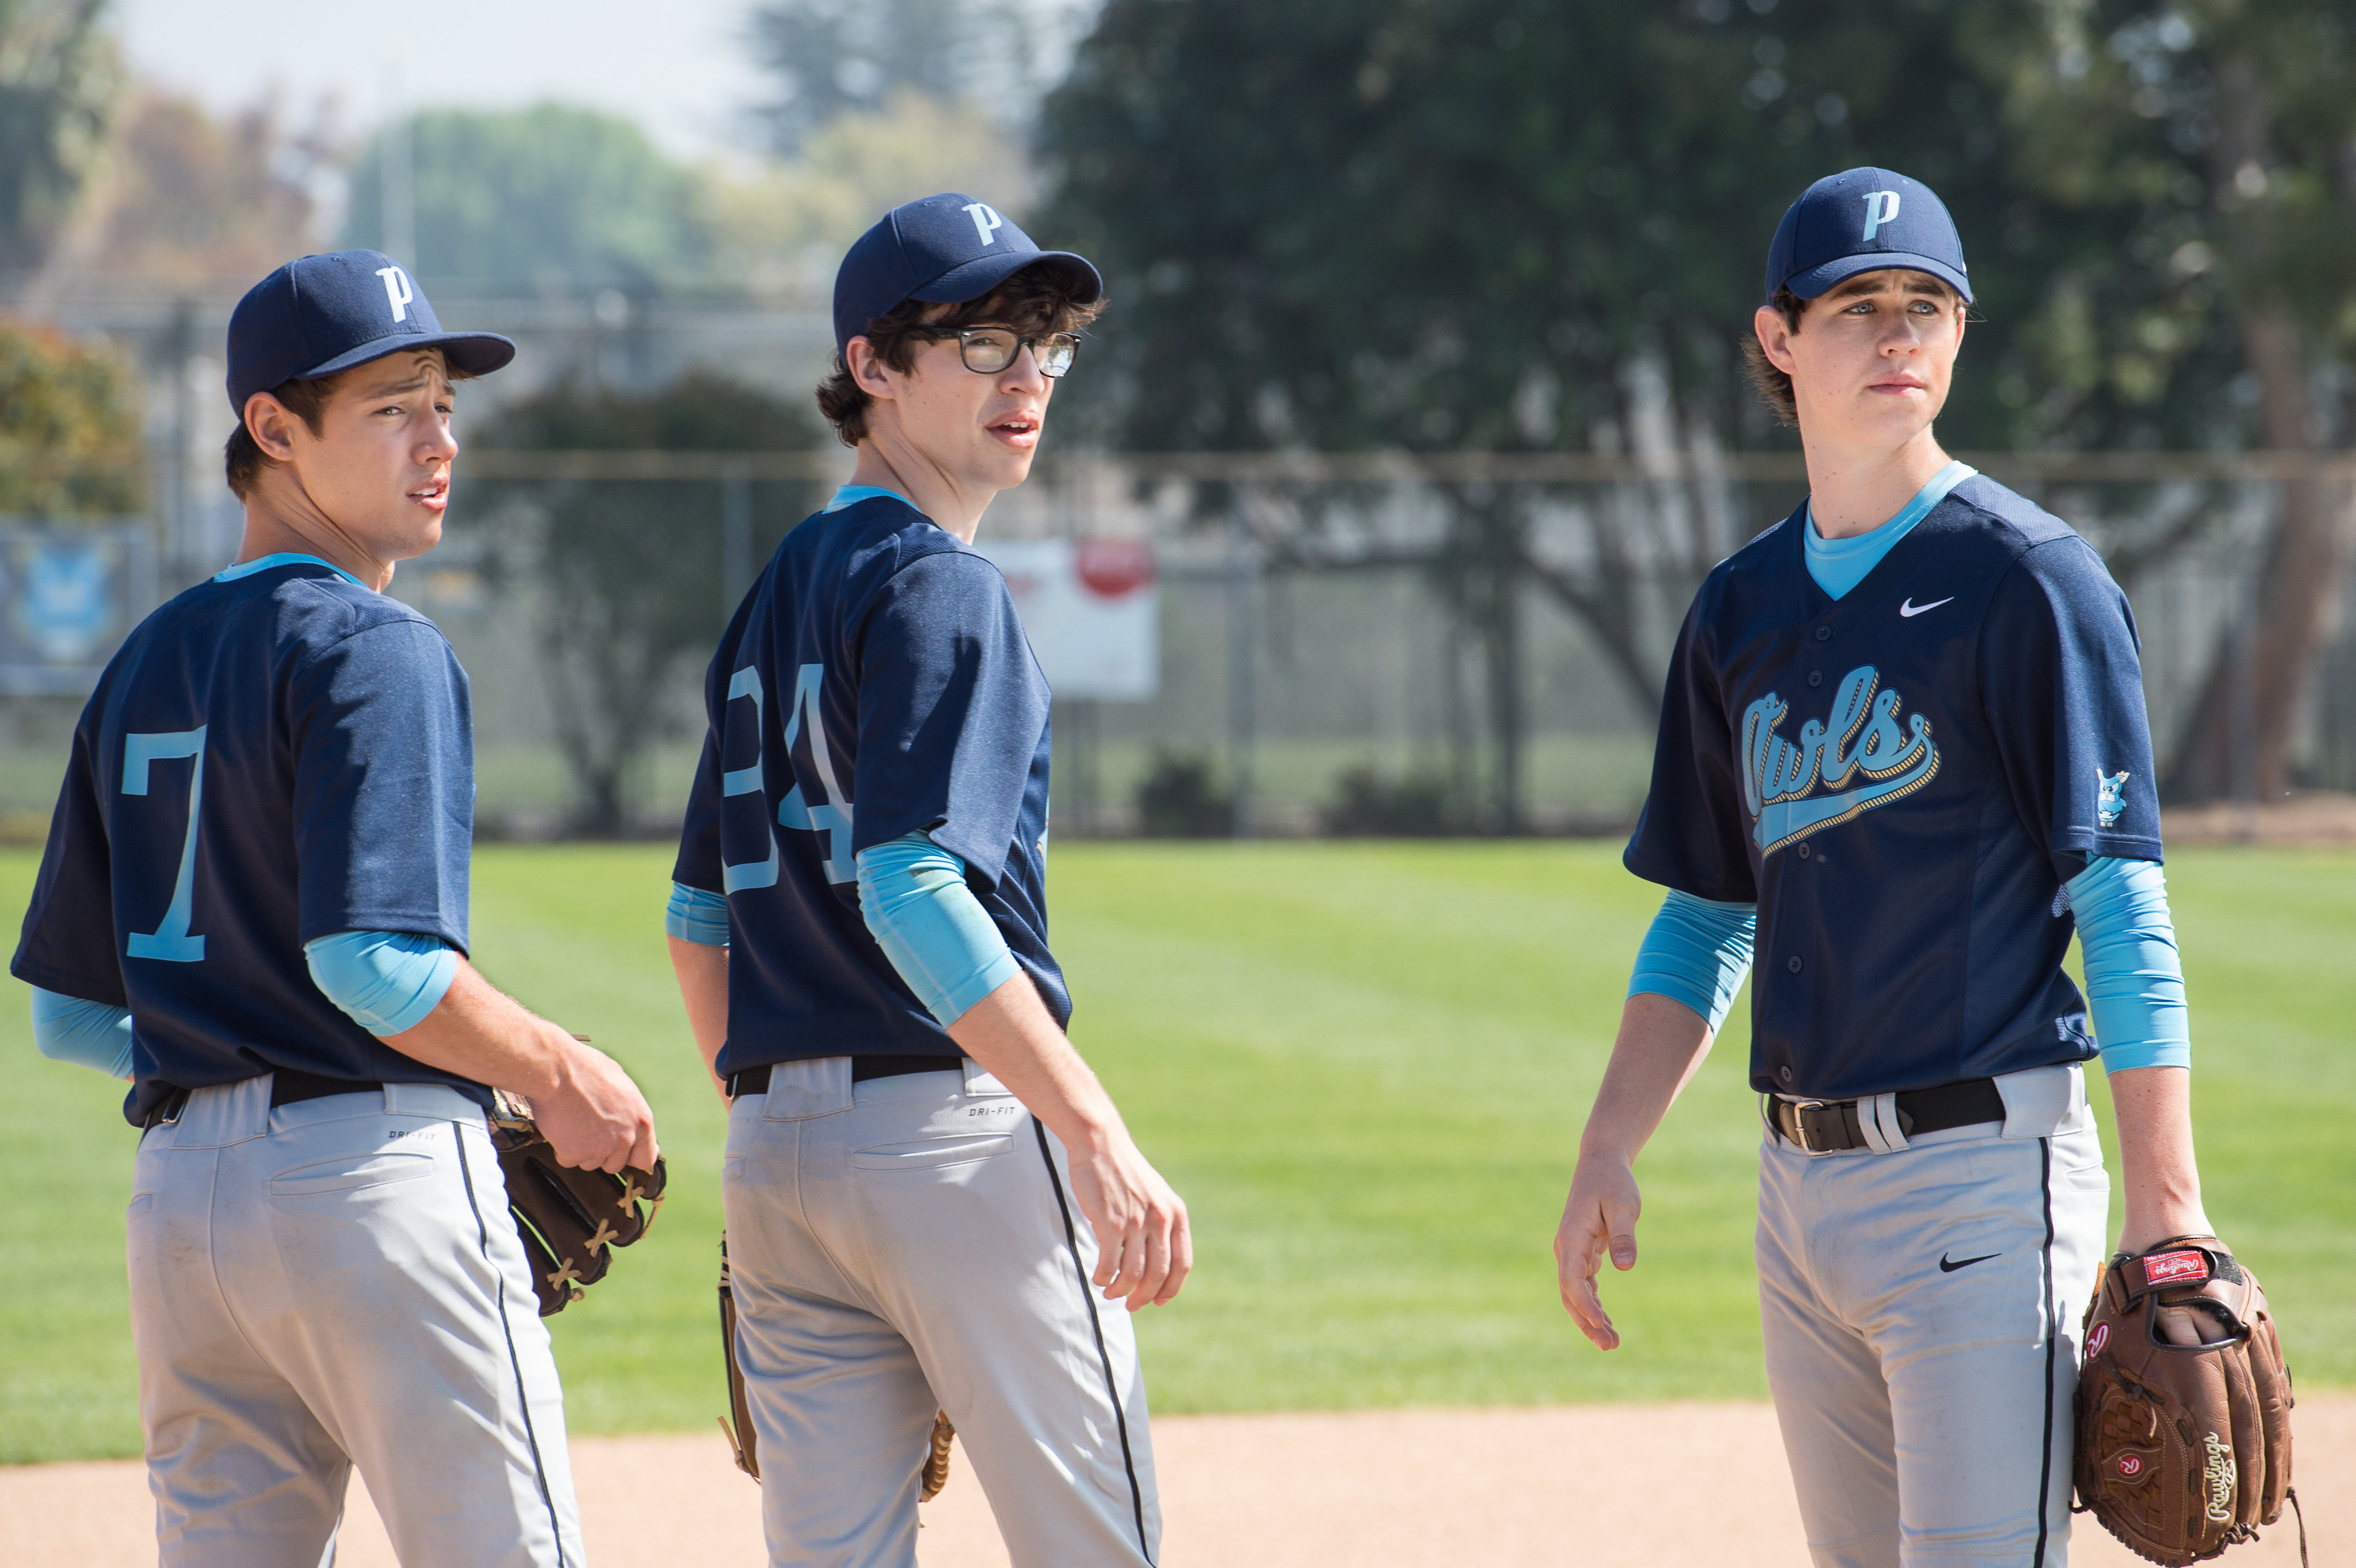 Franke (Cameron Dallas), Austin (Joey Bragg), and Jack (Nash Grier) are best friends and ball players in The Outfield.